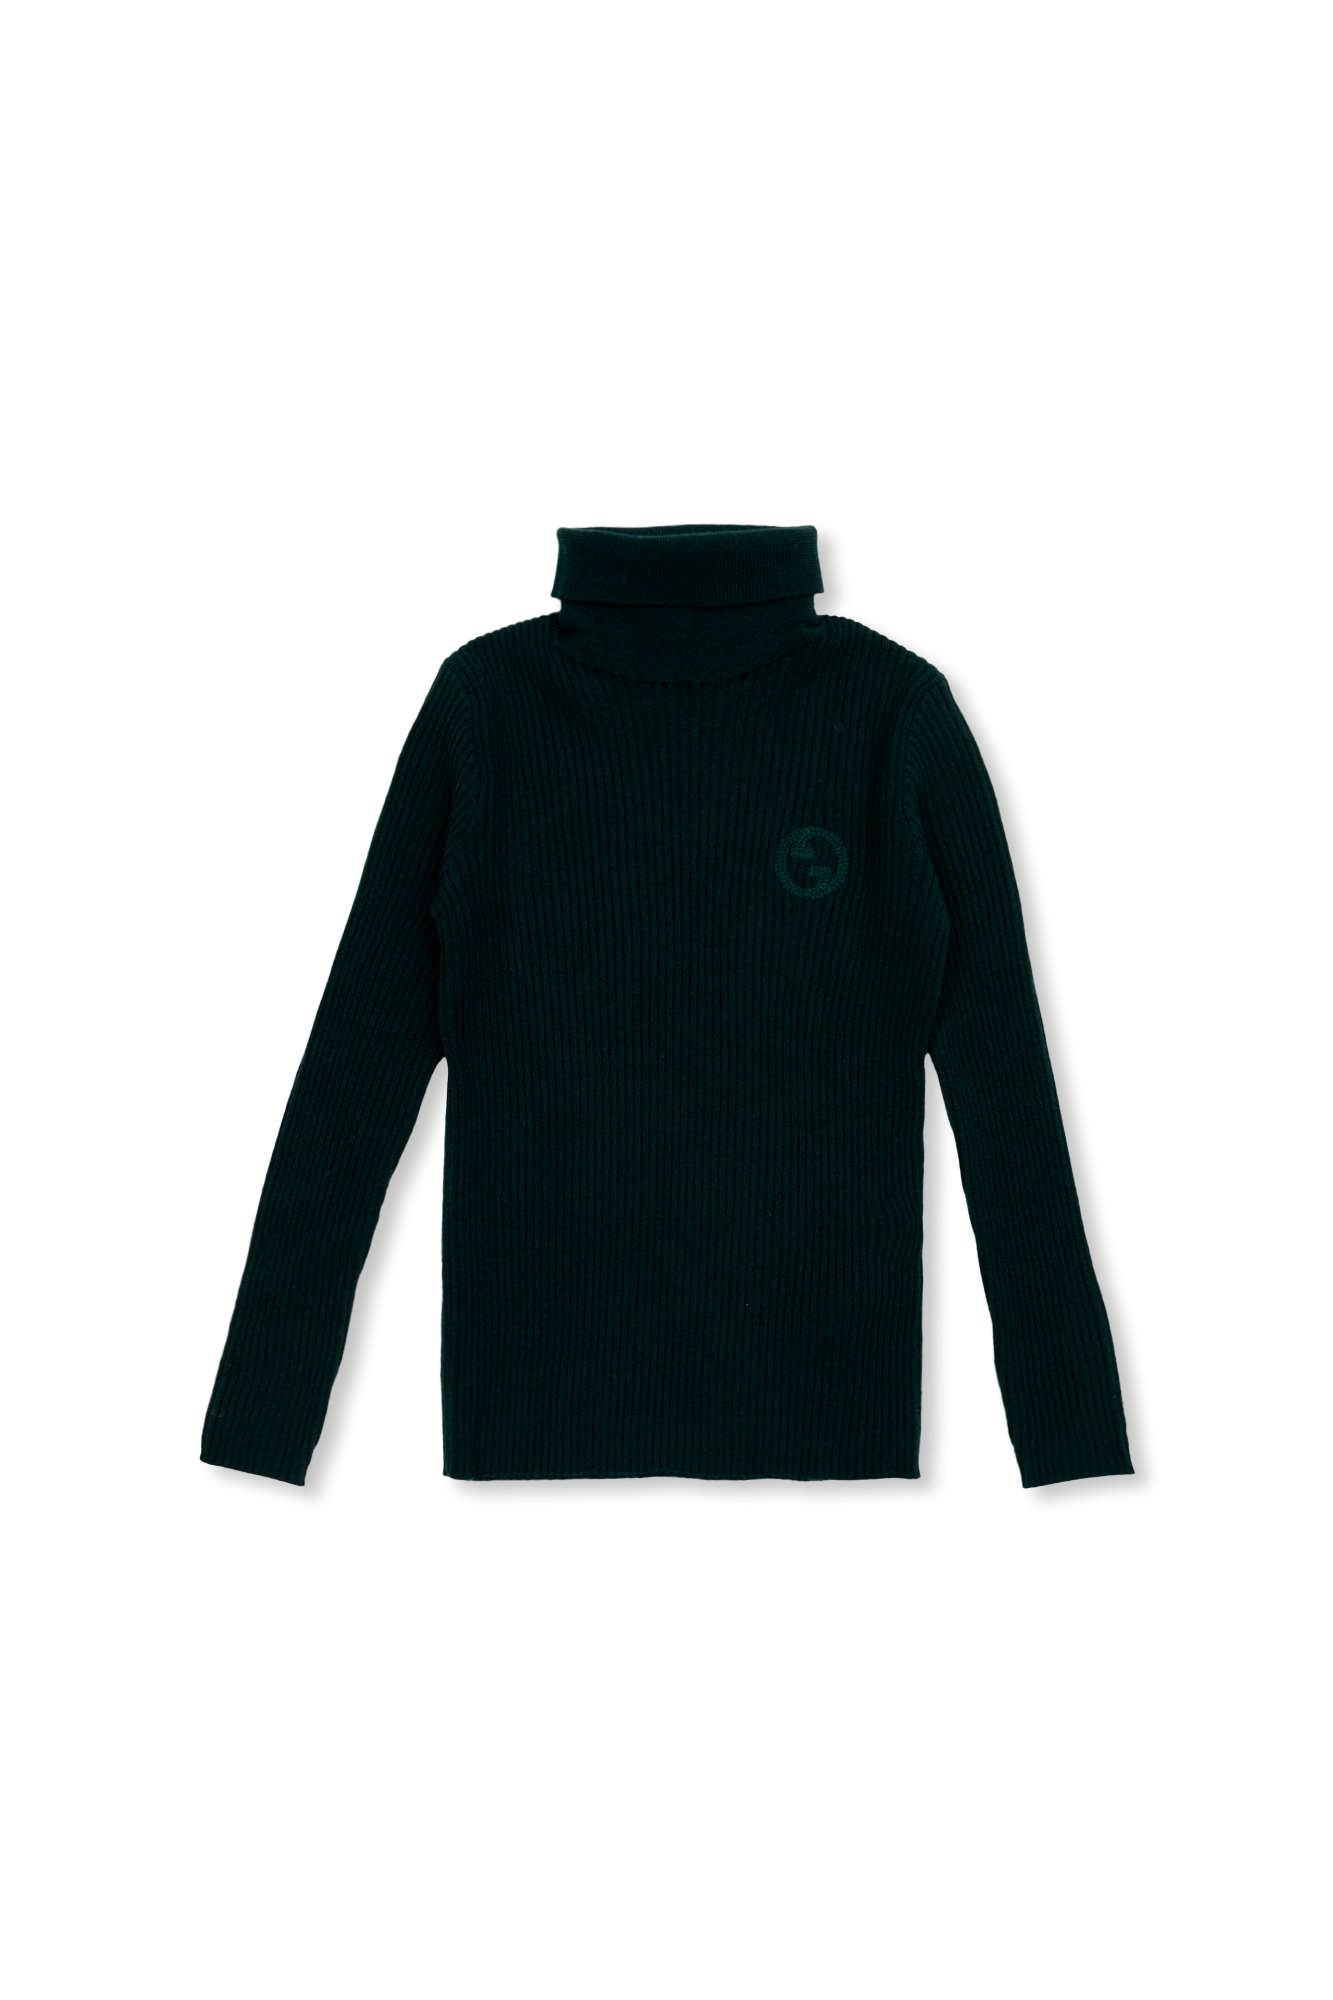 Gucci Kids Turtleneck sweater with logo